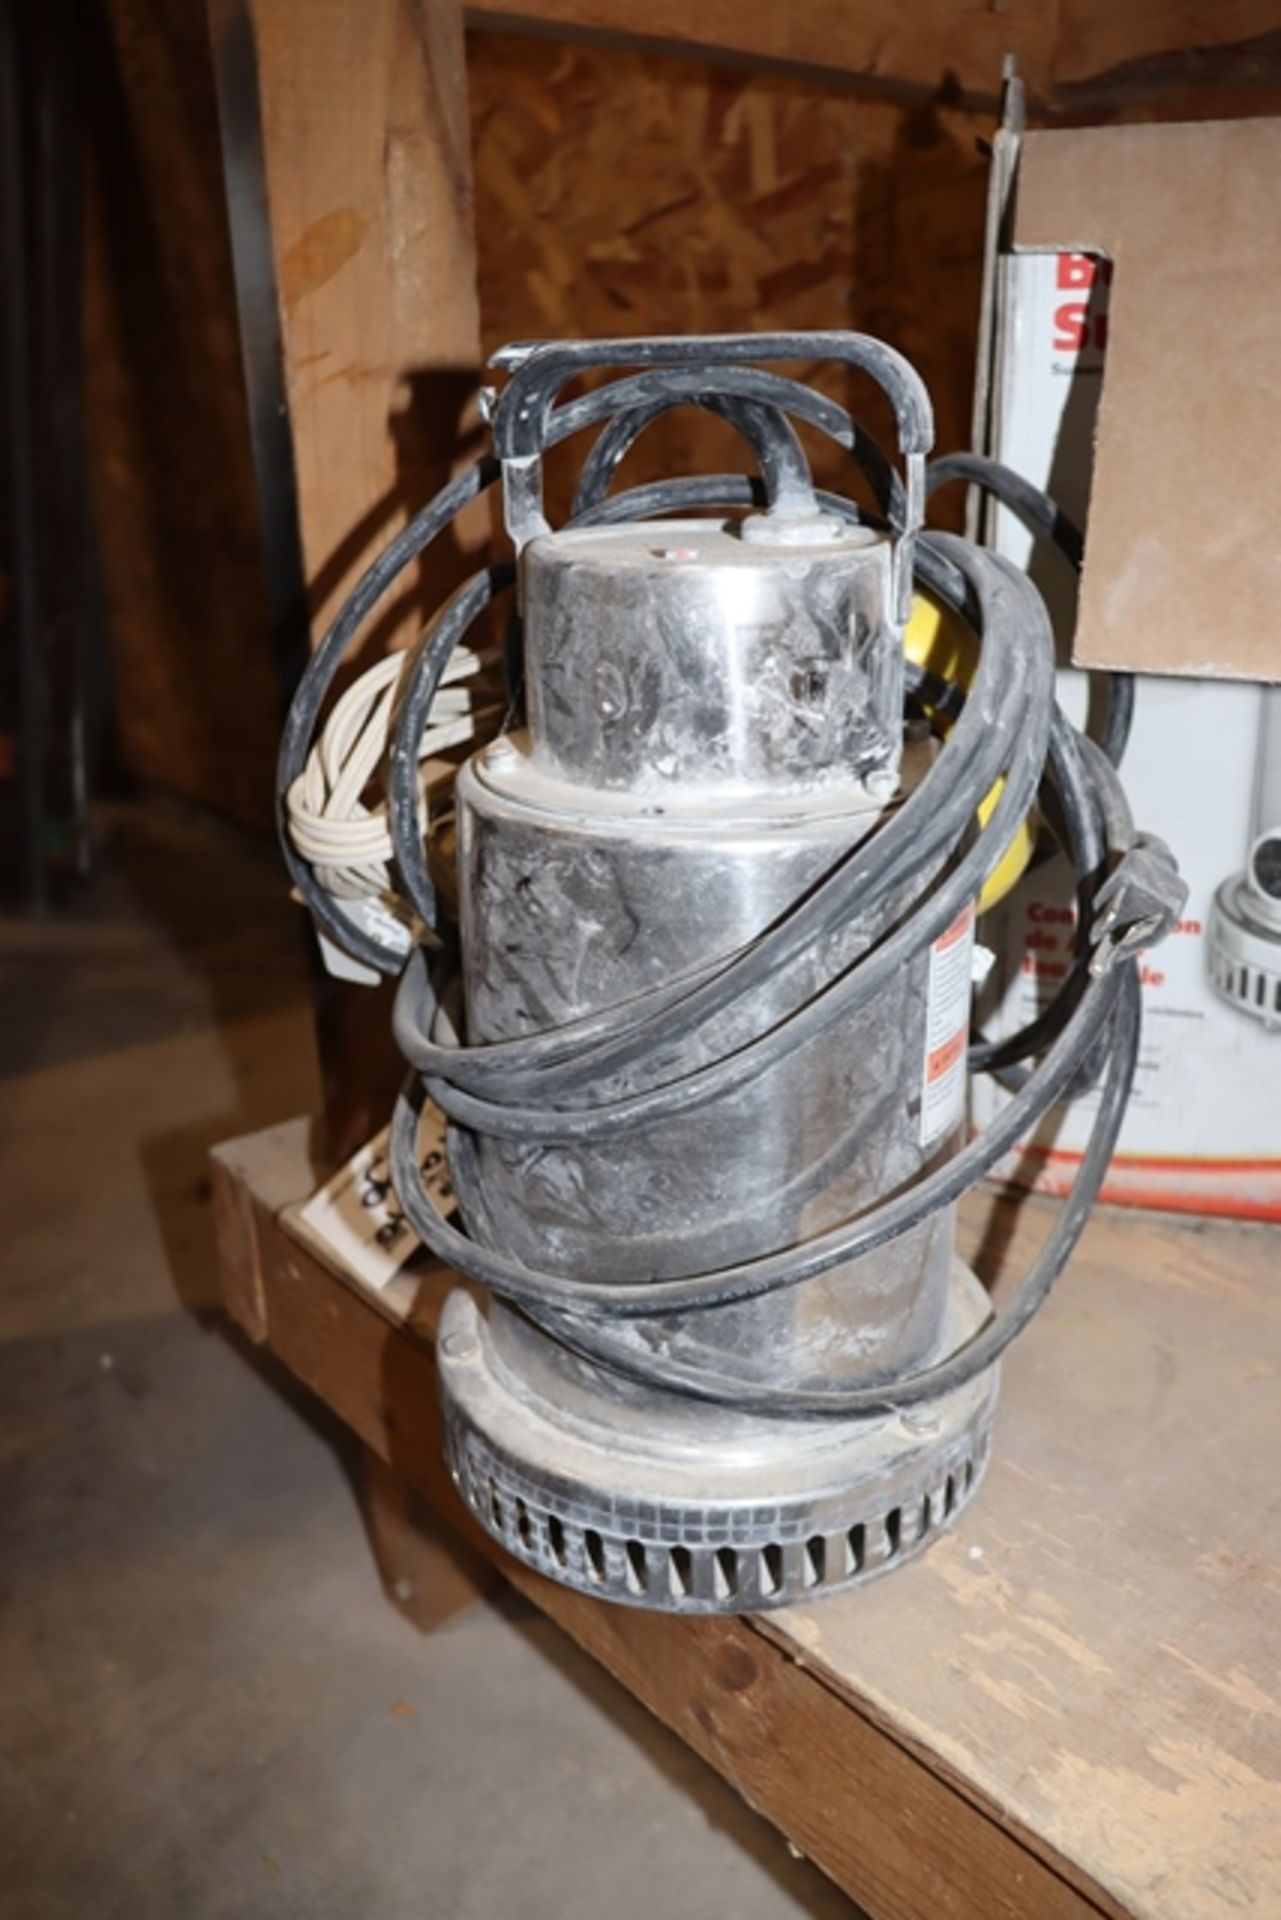 Pair to go - Flotec and other sump pumps - Image 2 of 4